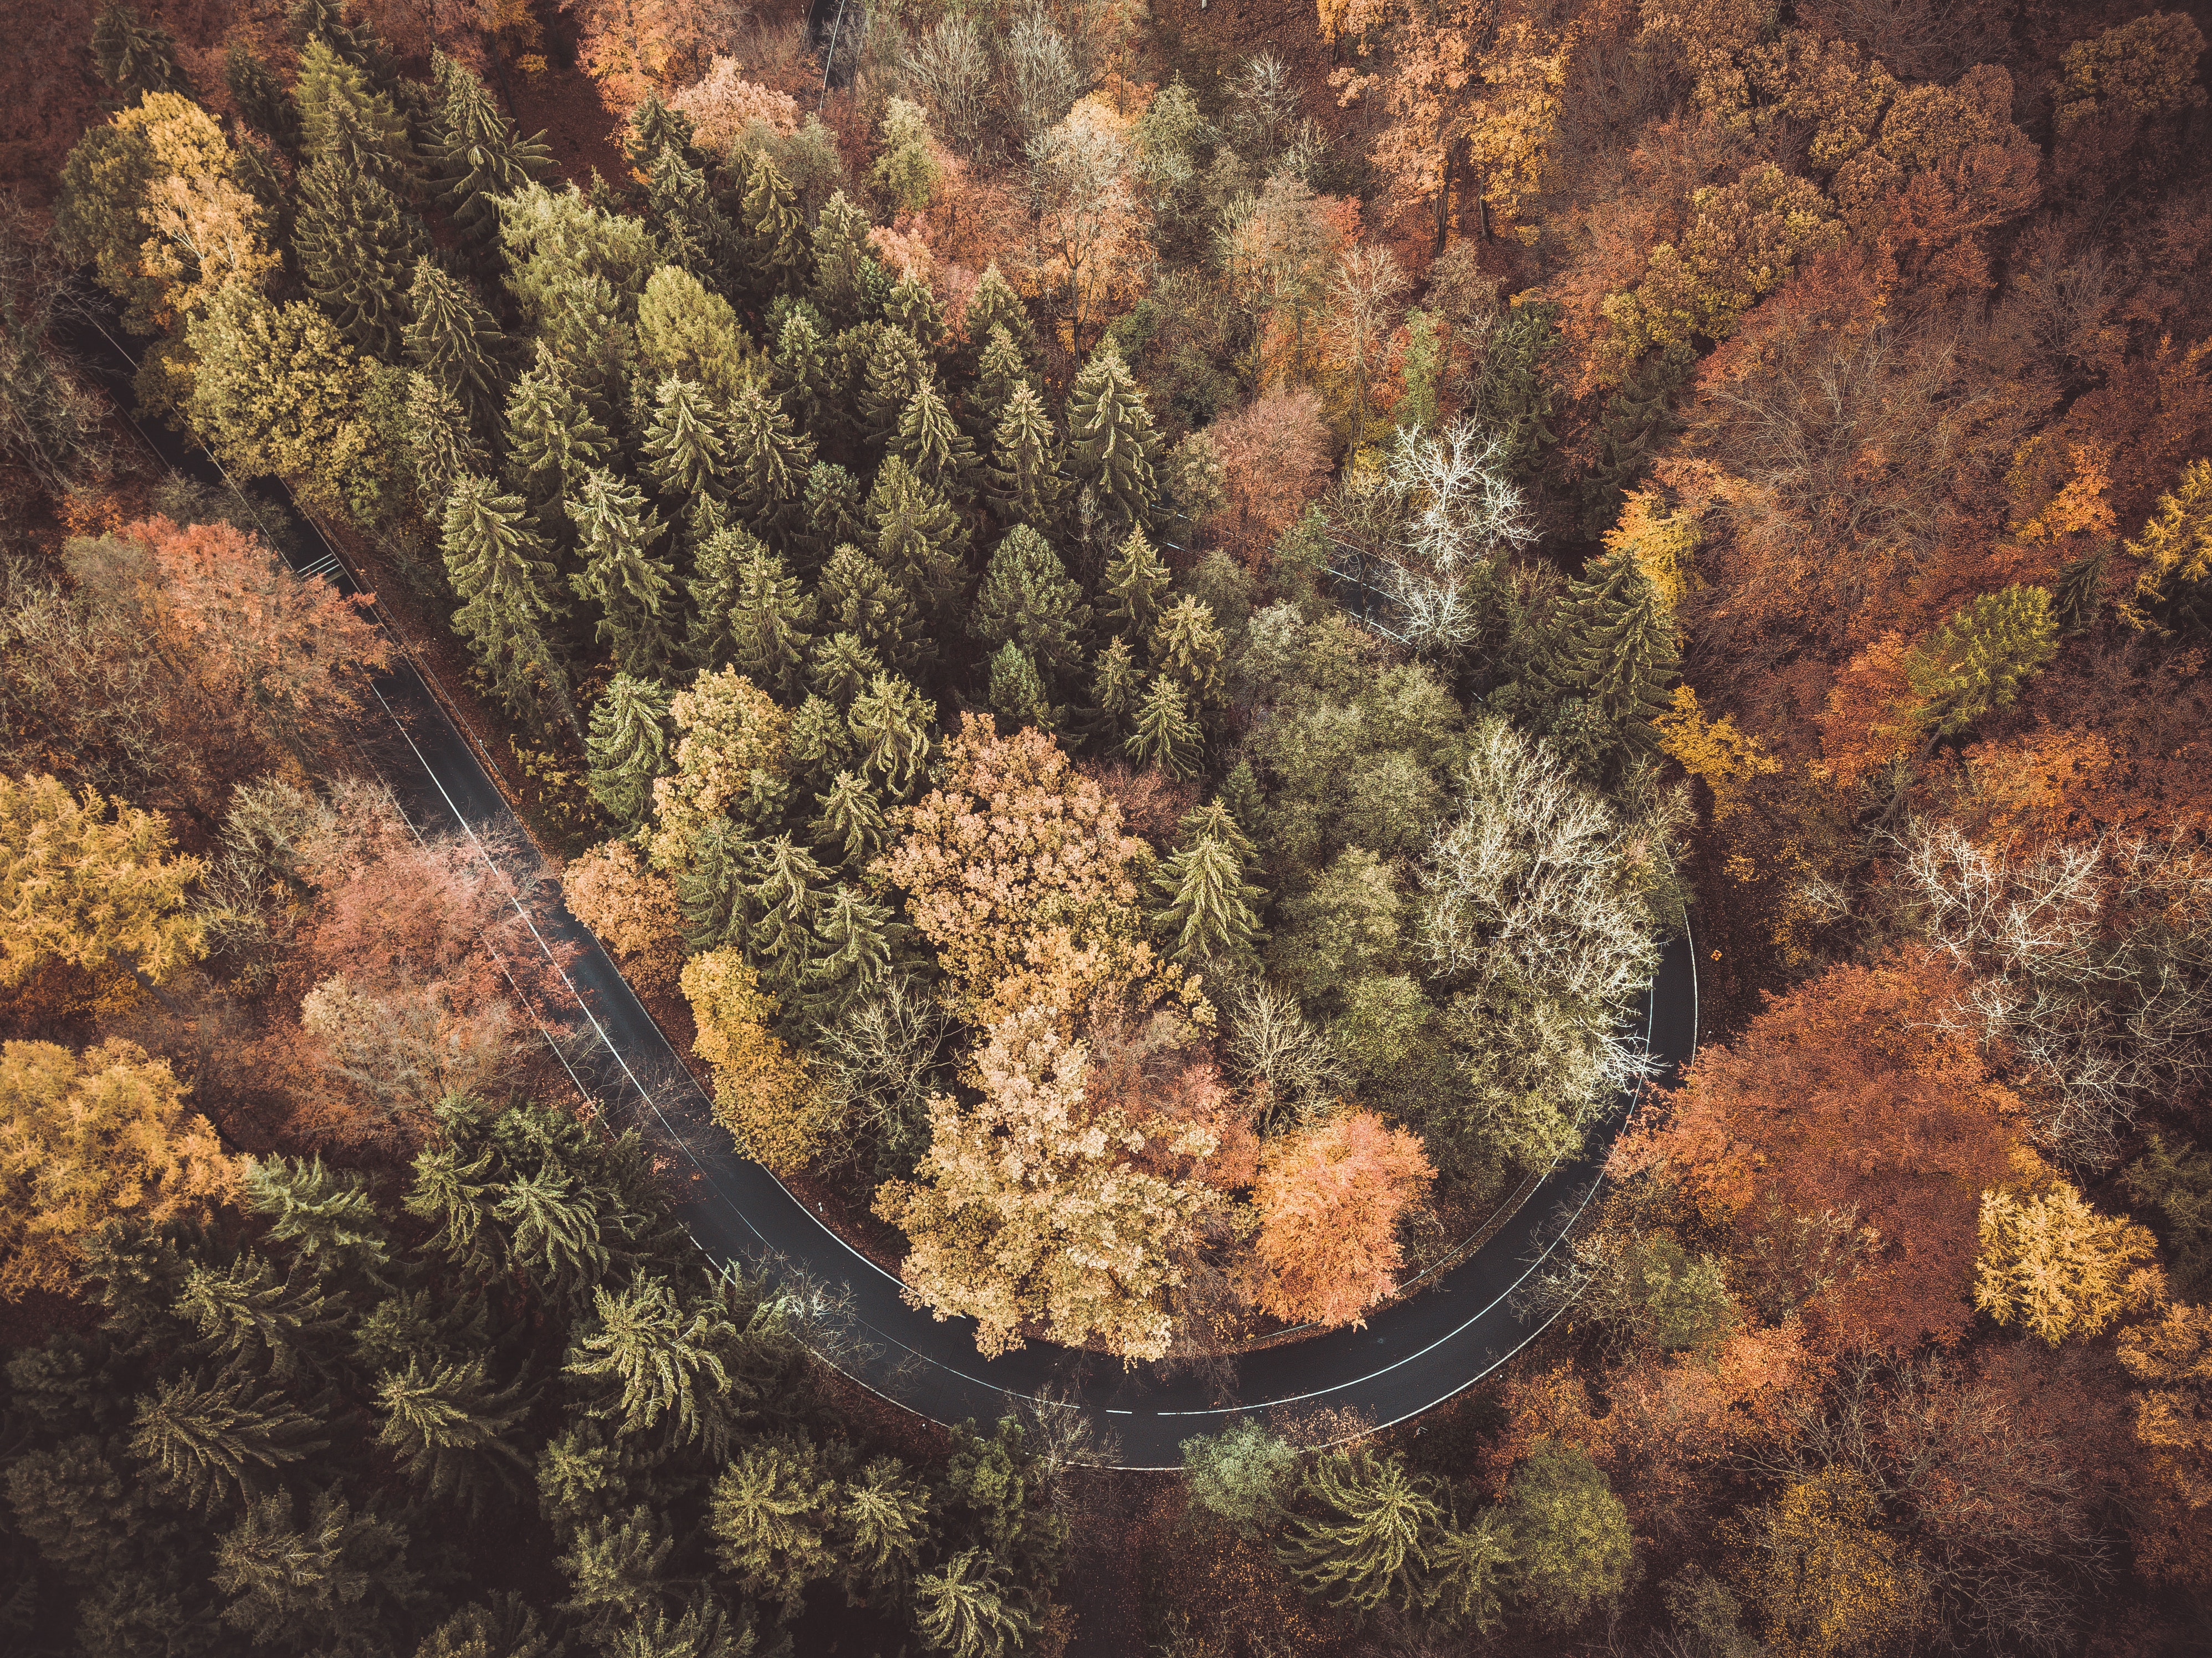 Bird's eye view of a curved road among trees